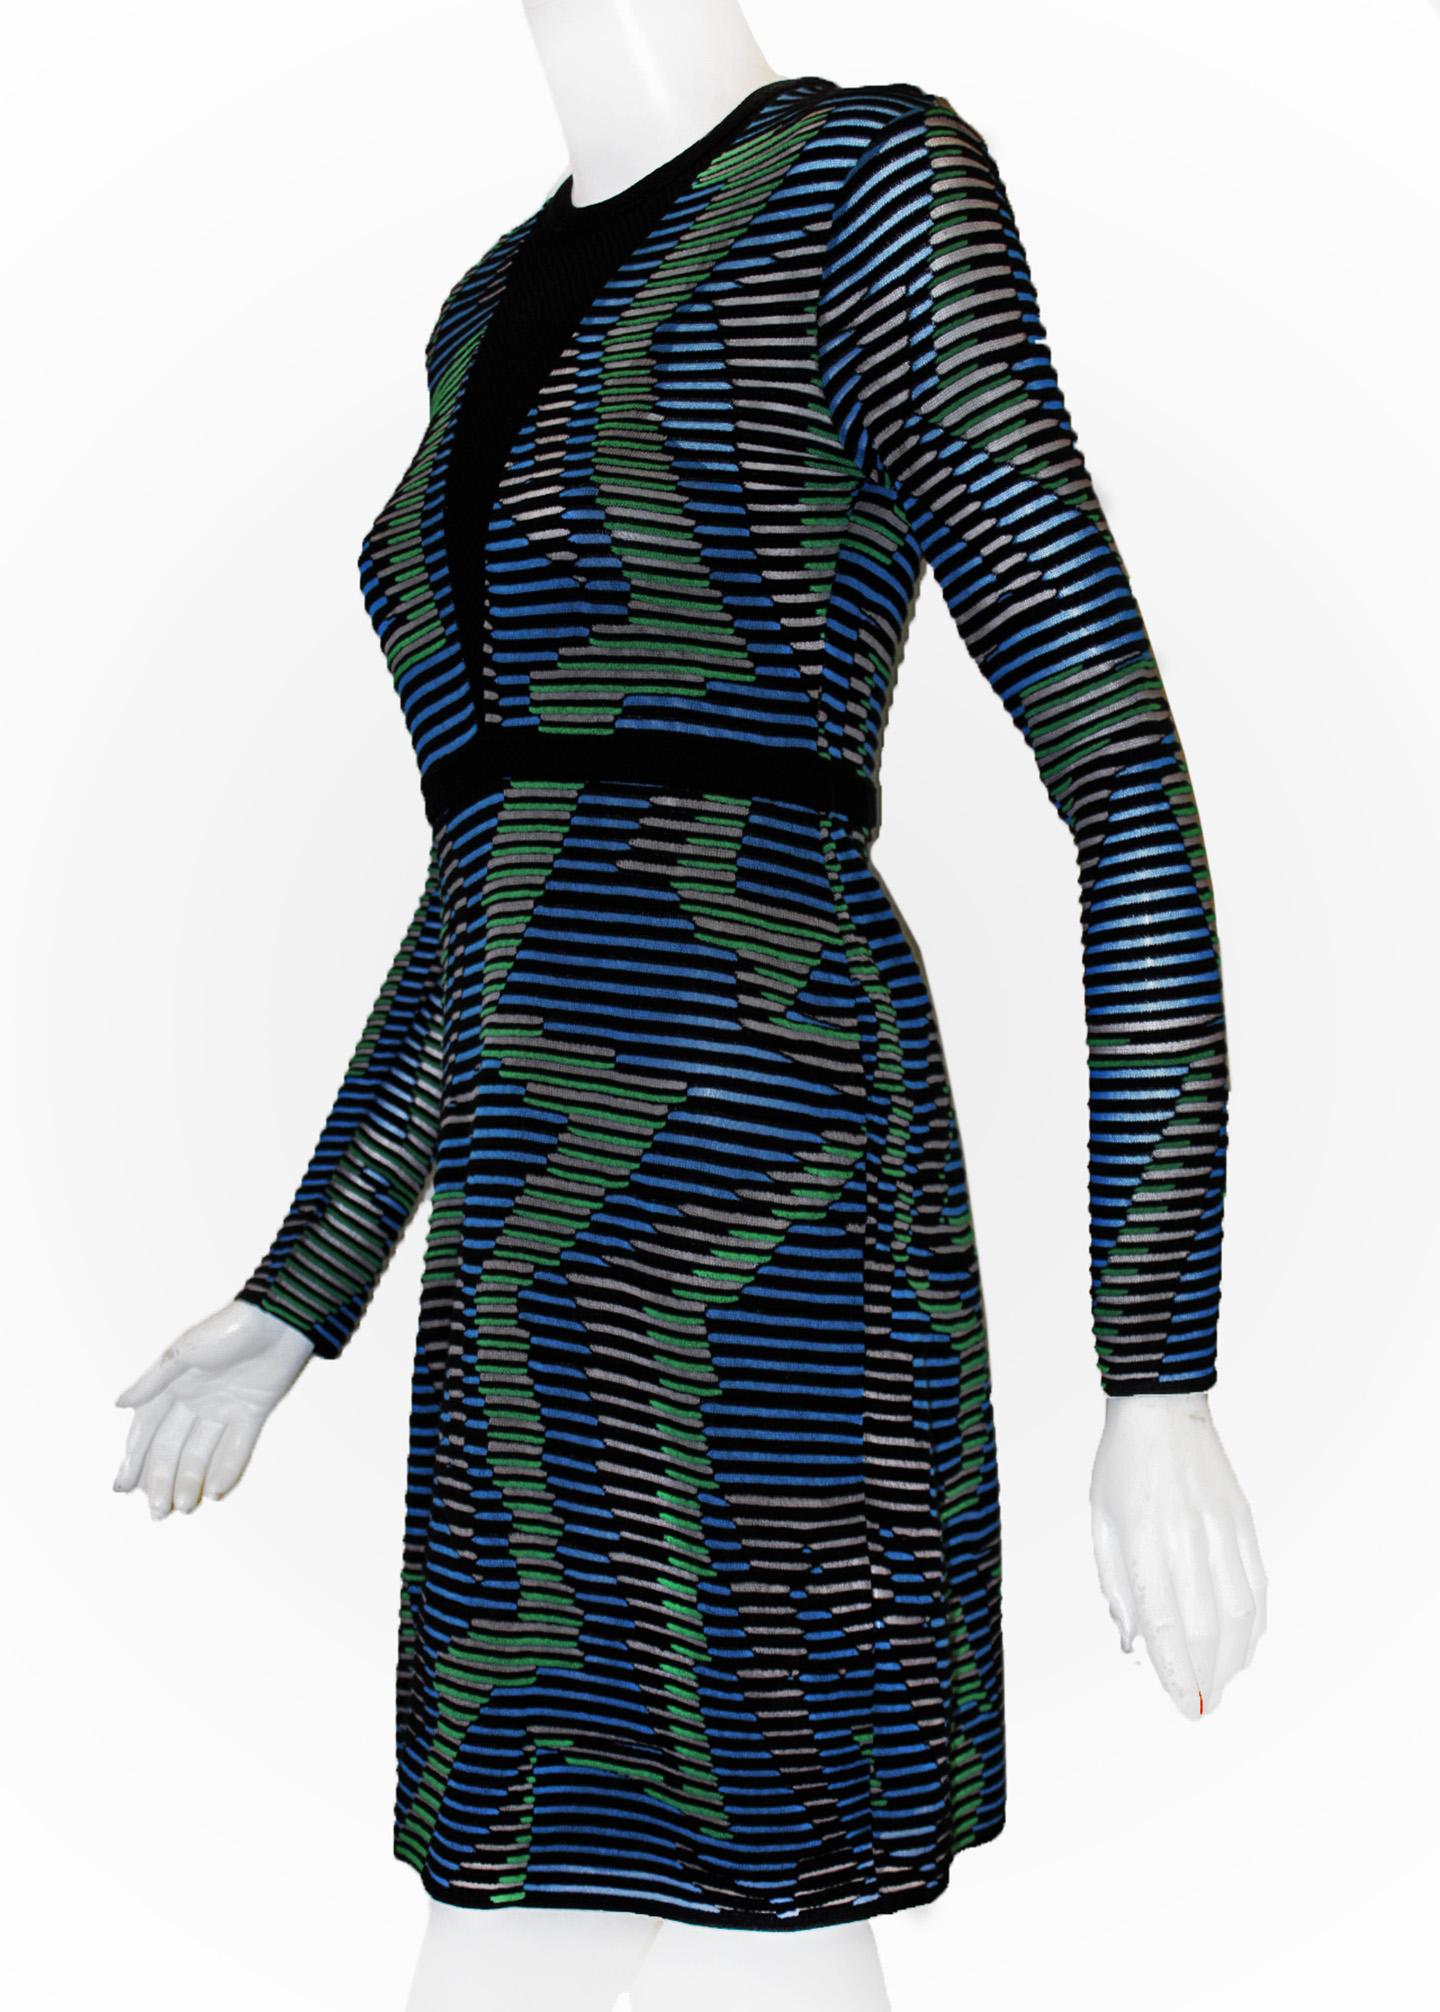 Missoni Multi Color Long Sleeve Abstract Knit Dress In Excellent Condition For Sale In Palm Beach, FL